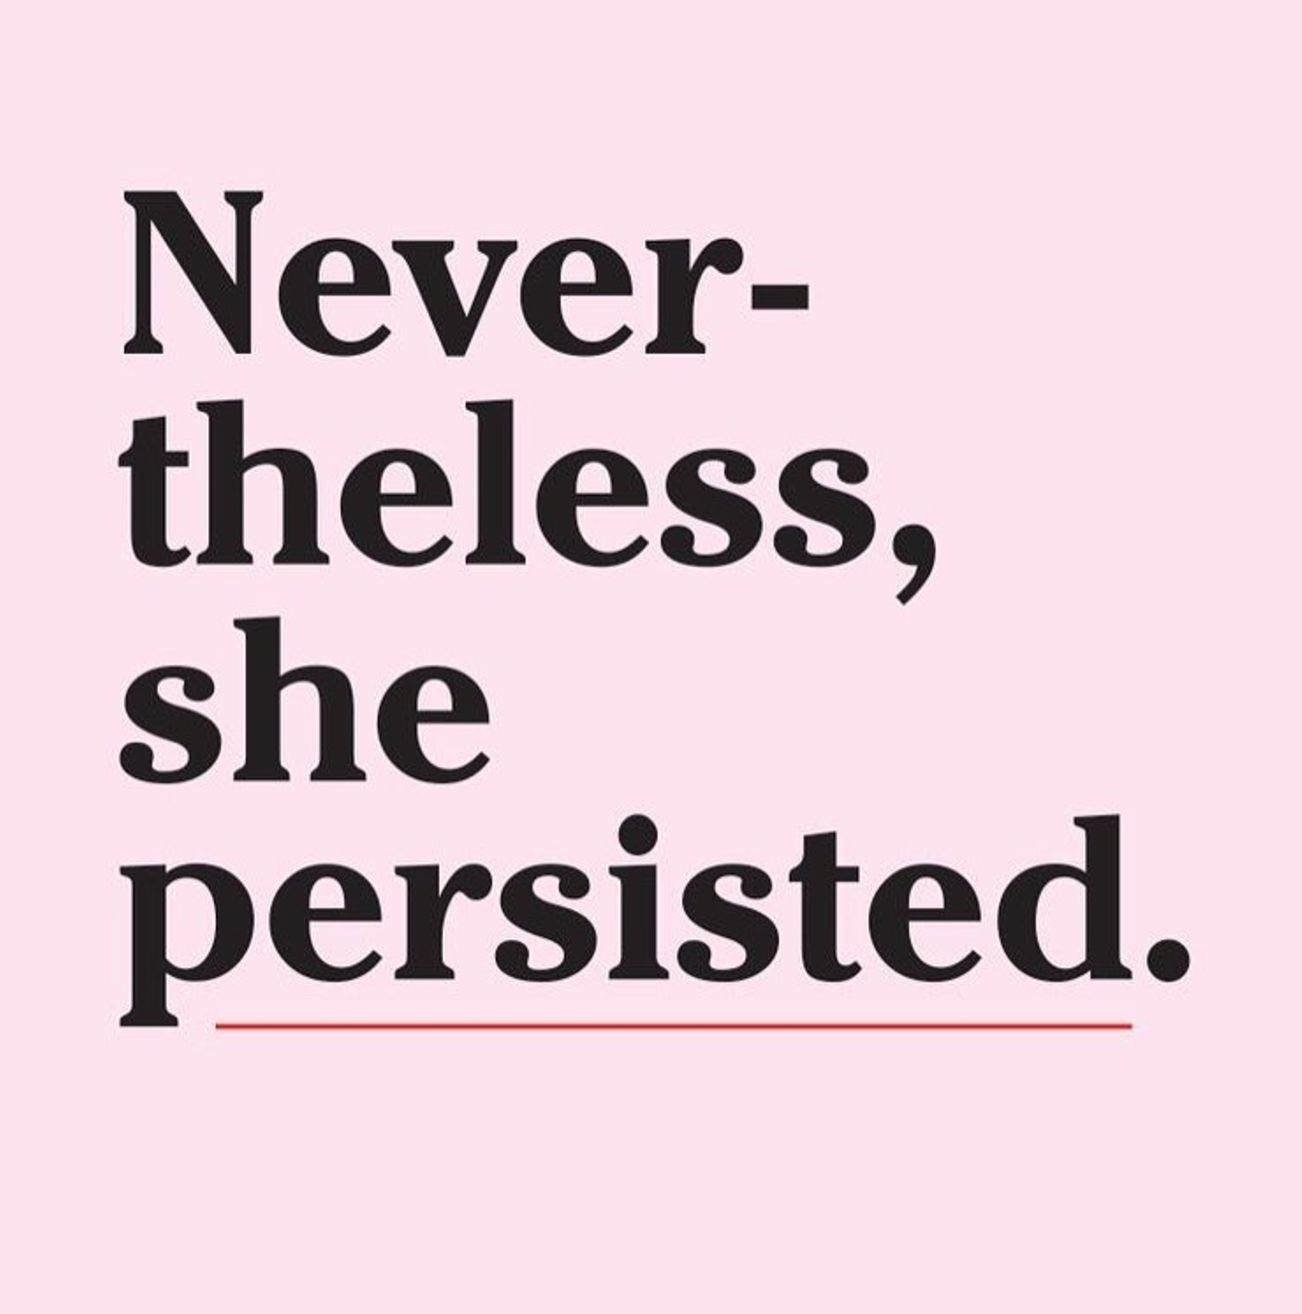 nevertheless, she persisted